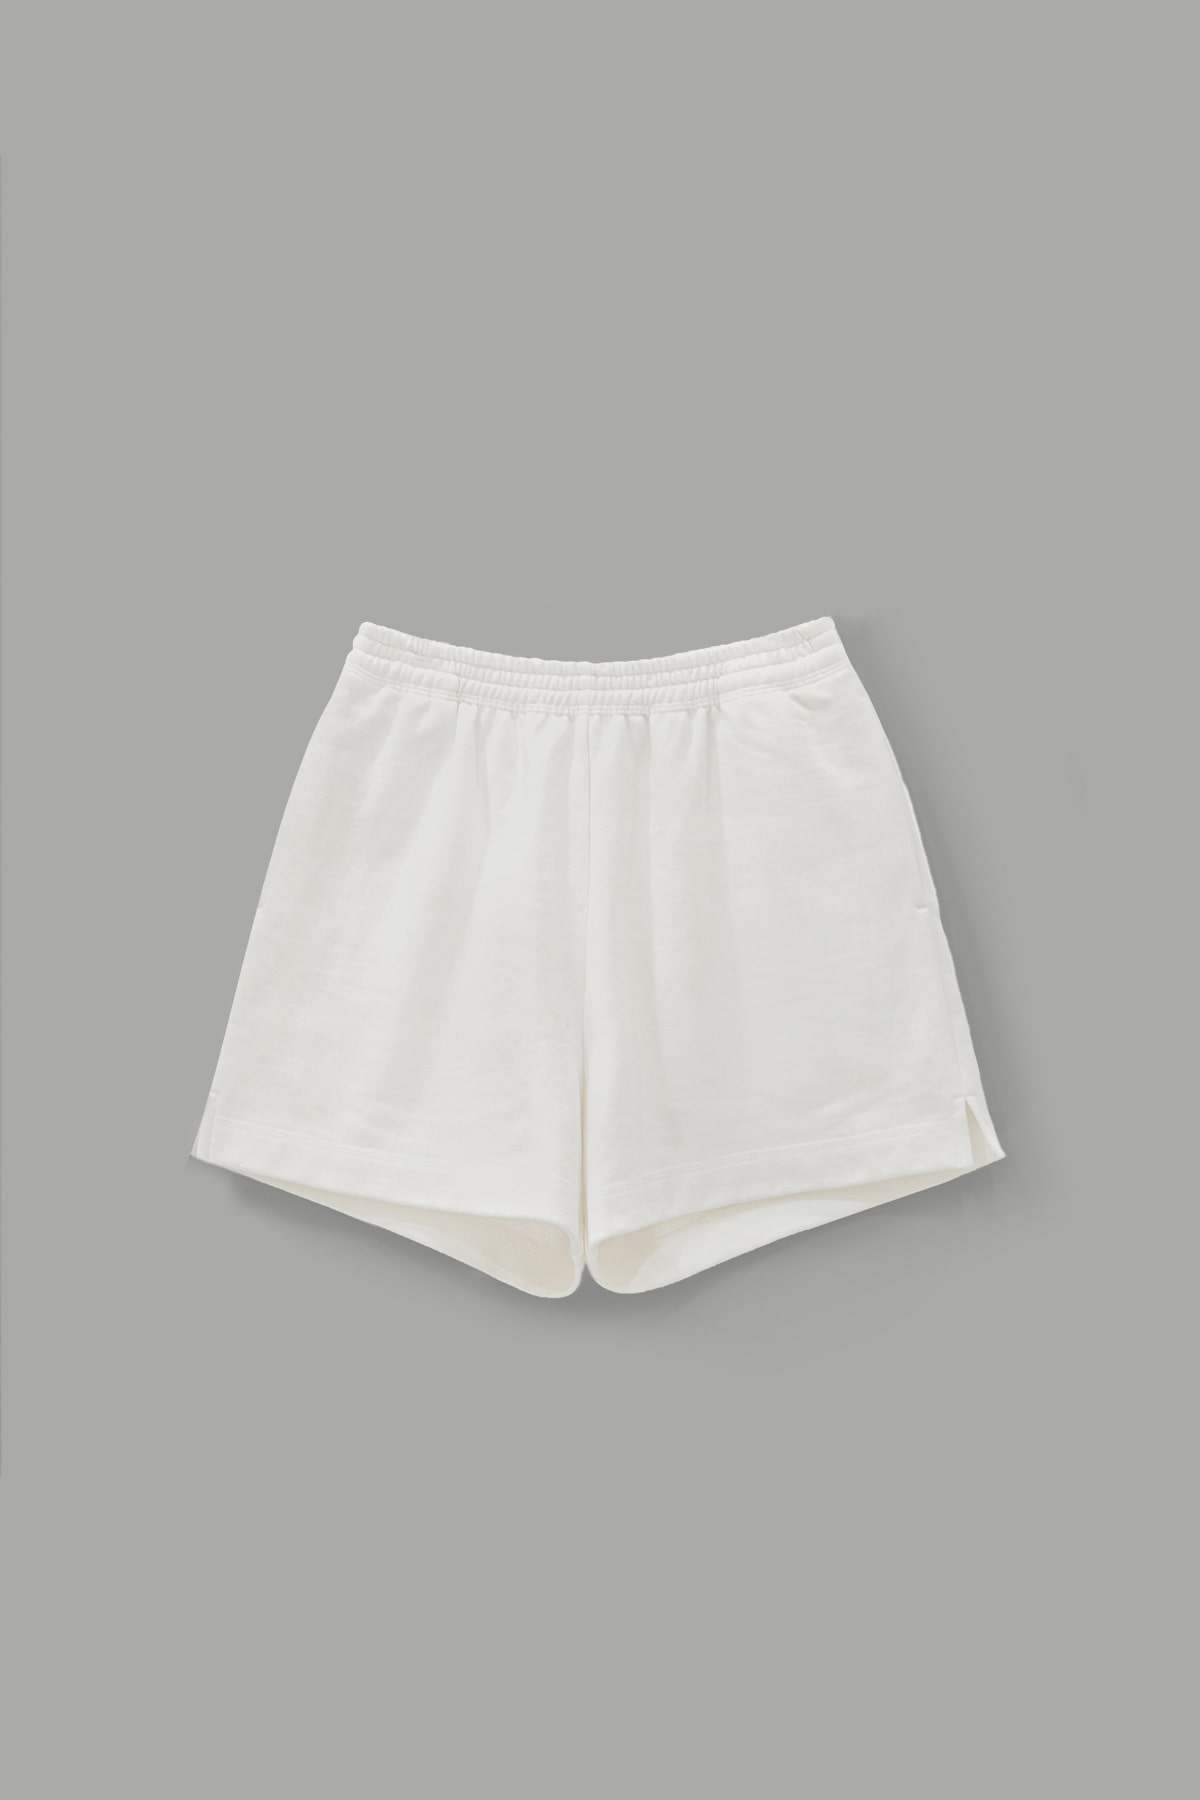 French Terry Shorts (2 colors)